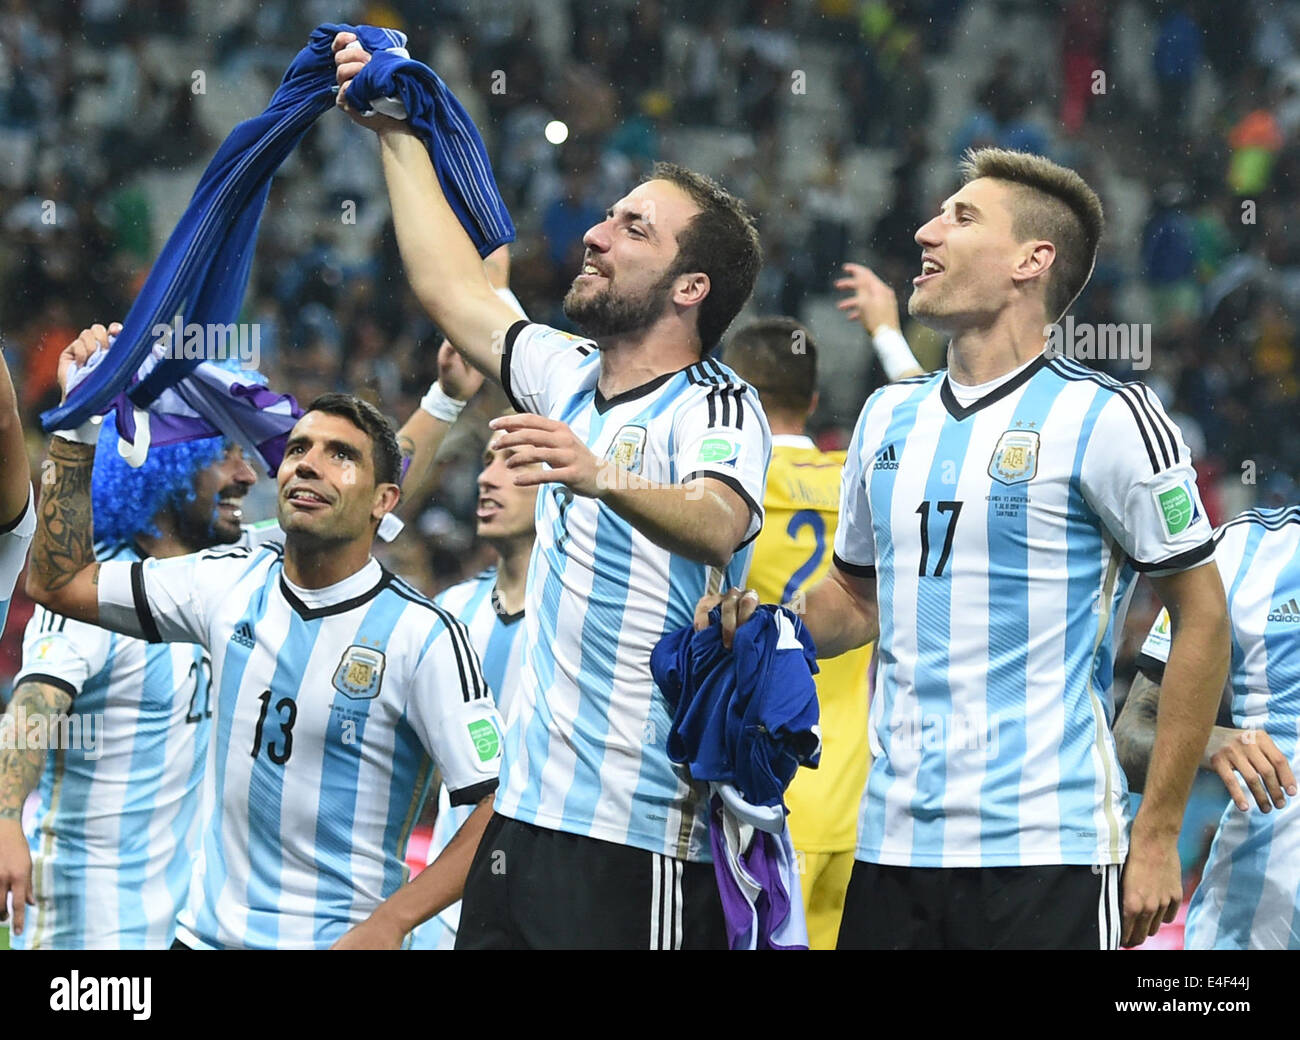 Sao Paulo, Brazil. 09th July, 2014. Argentina's Augusto Fernandez (L-R), Gonzalo Higuain and Federico Fernandez celebrate after winning the FIFA World Cup 2014 semi-final soccer match between the Netherlands and Argentina at the Arena Corinthians in Sao Paulo, Brazil, 09 July 2014. Photo: Marius Becker/dpa/Alamy Live News Stock Photo